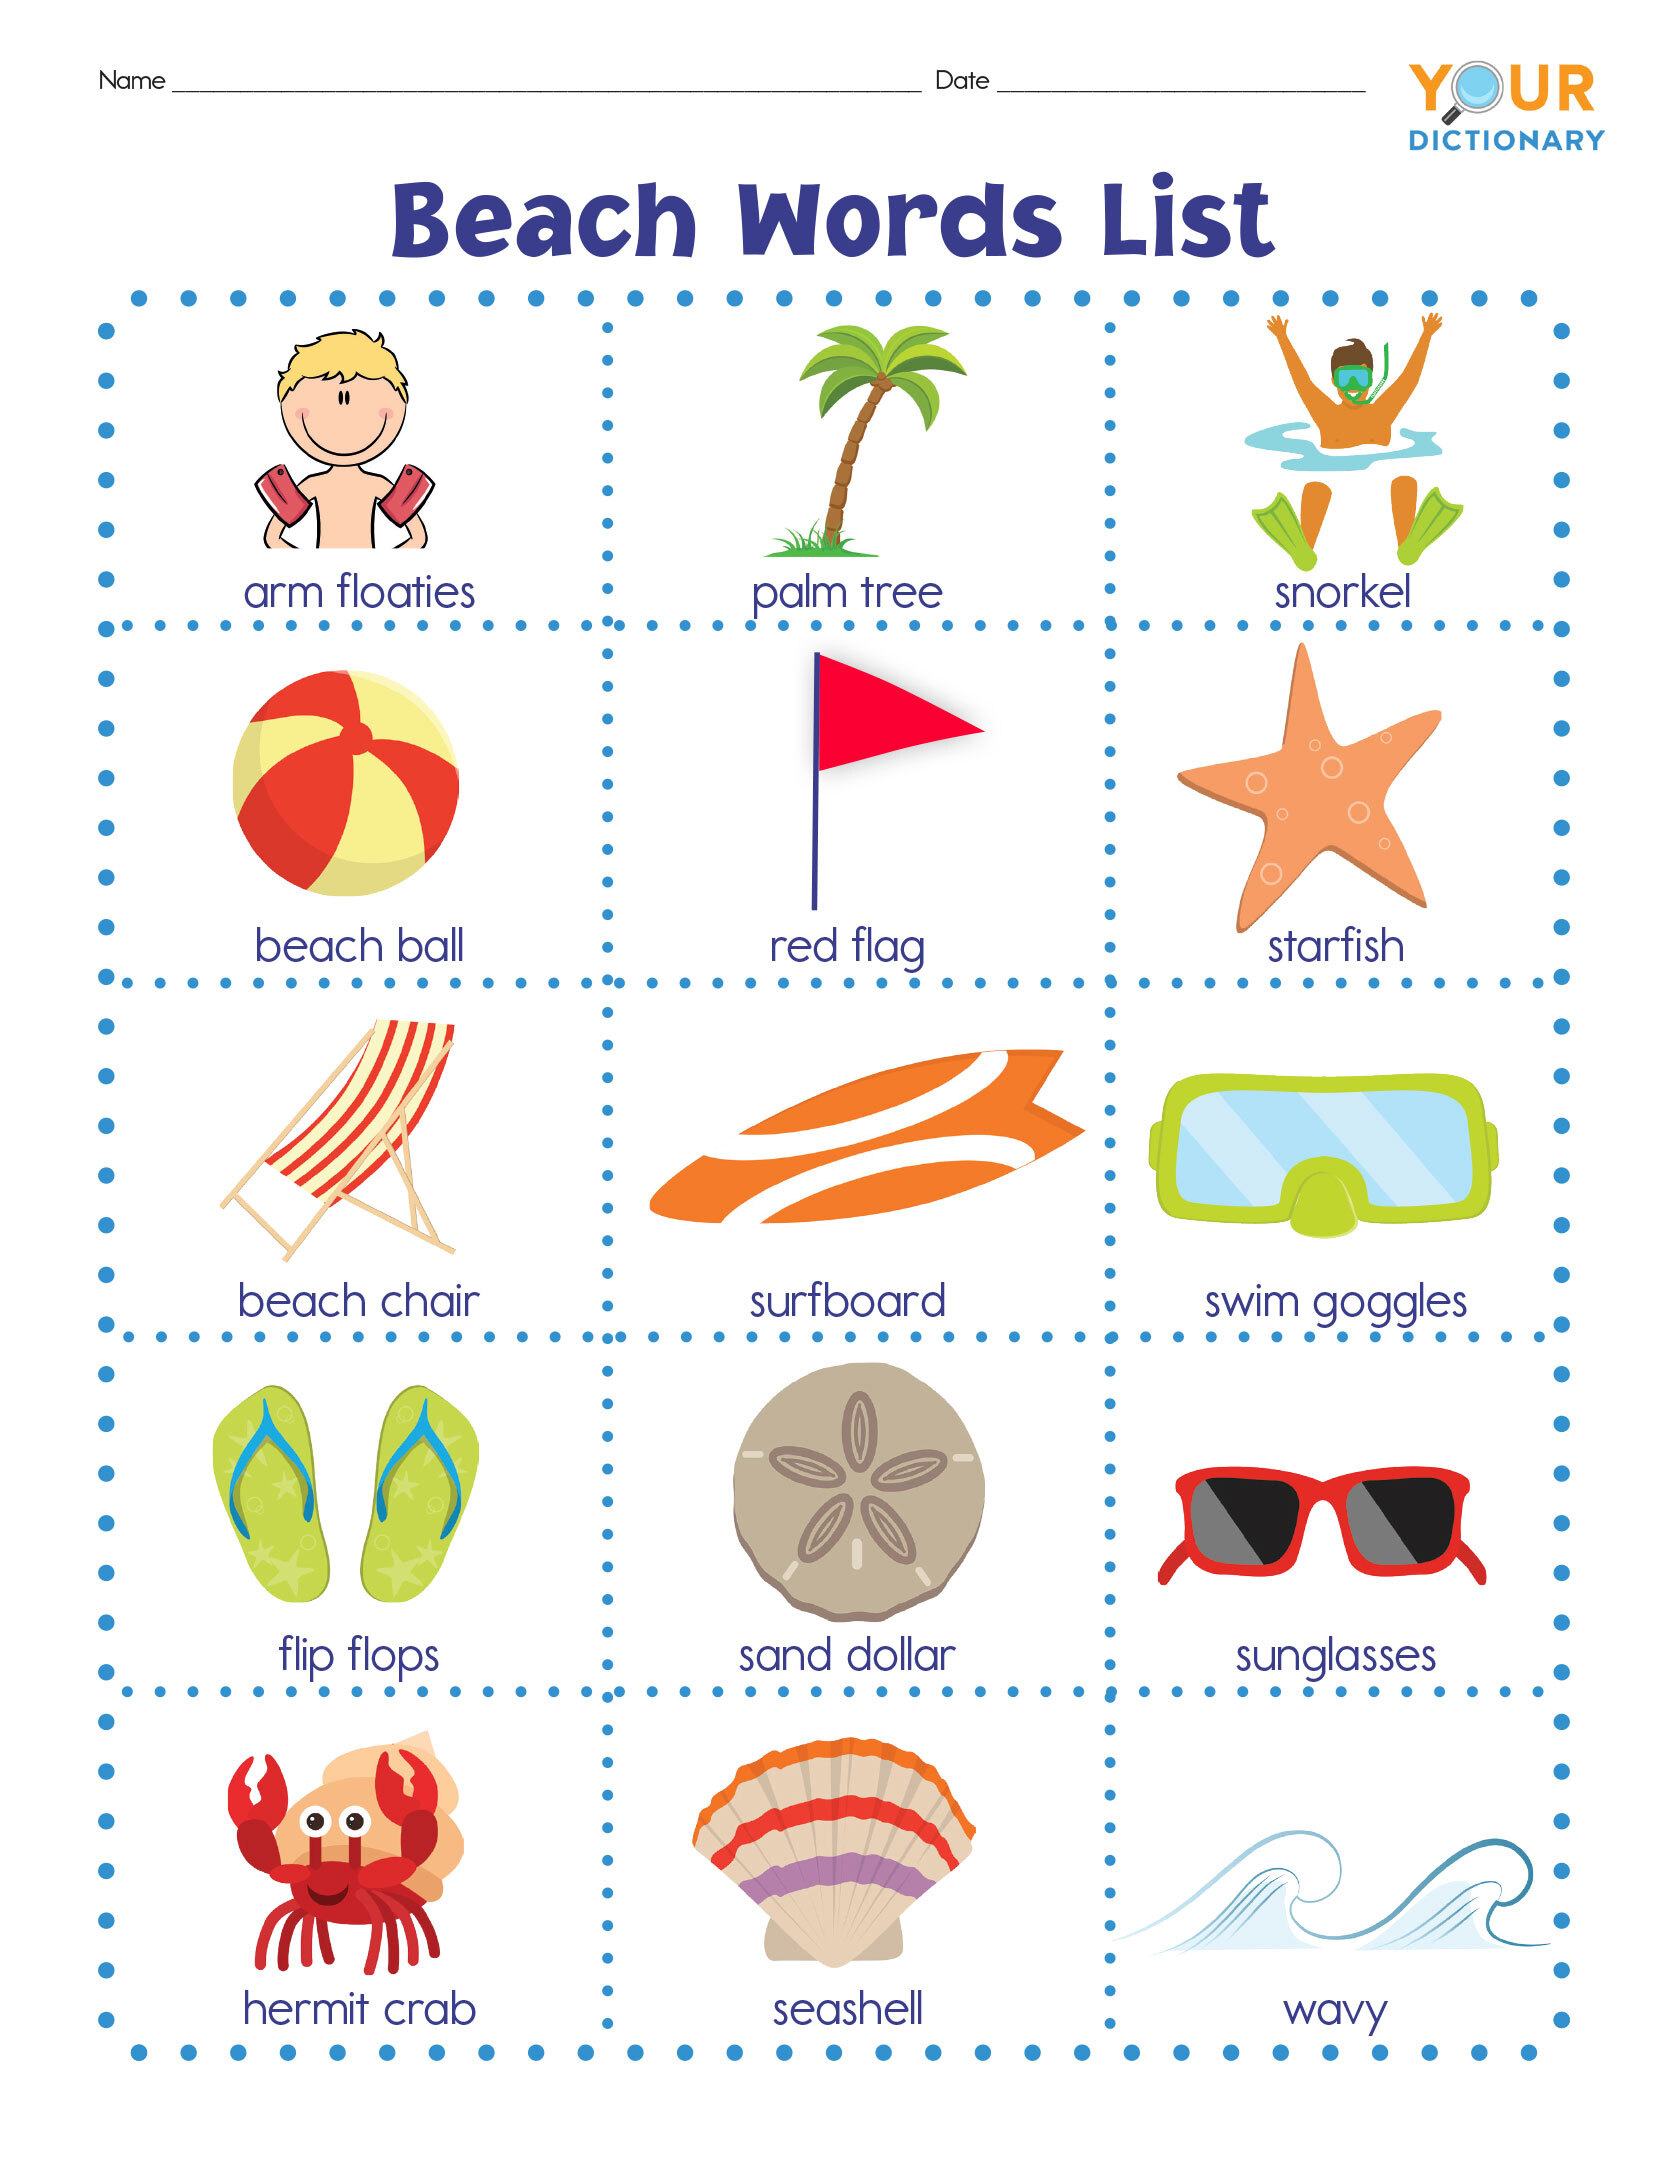 beach words list with pictures